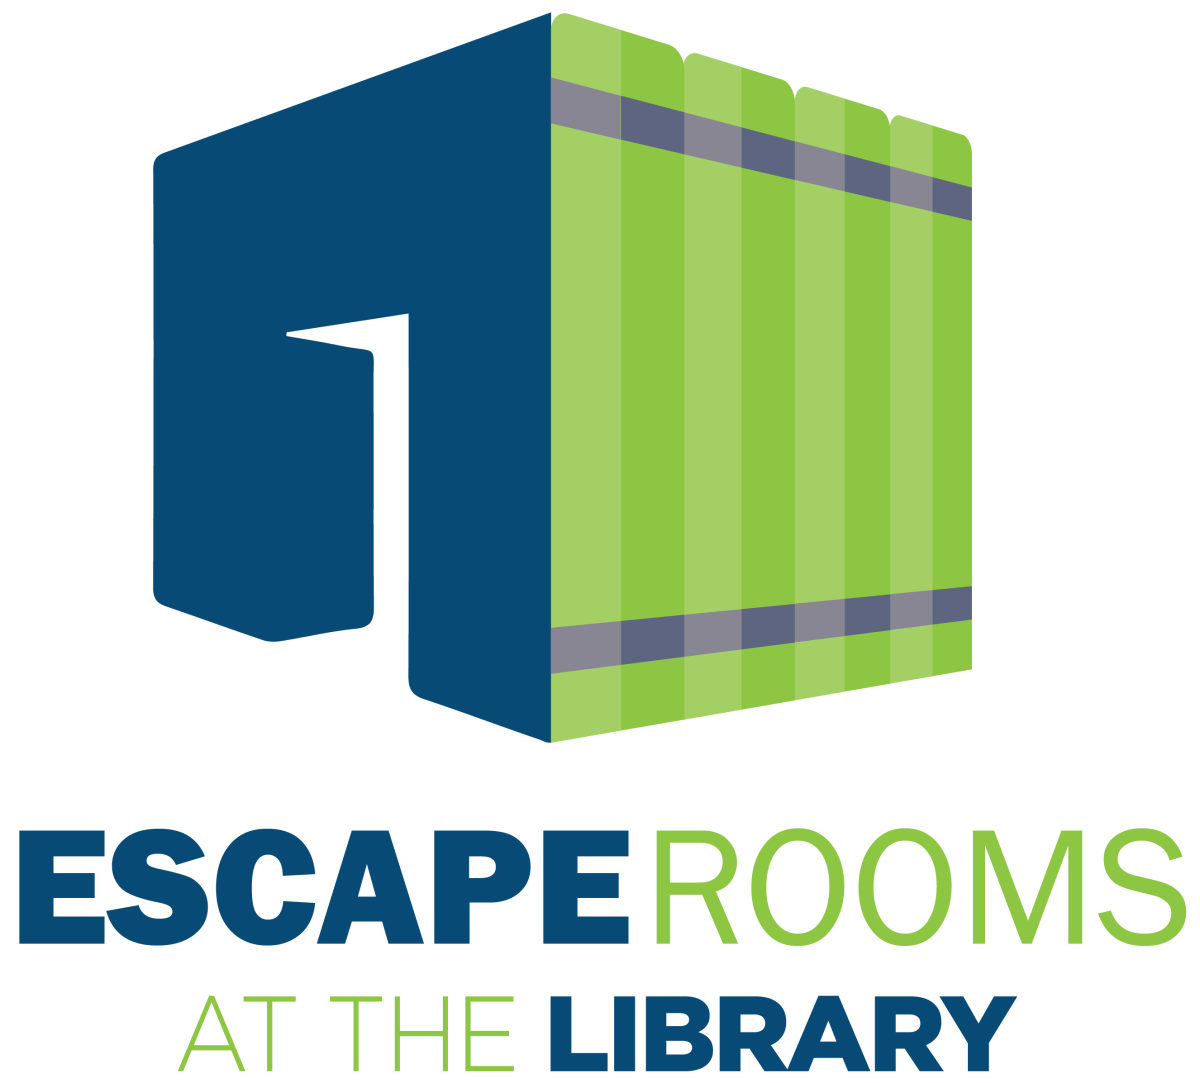 Escape Rooms at the Library logo.